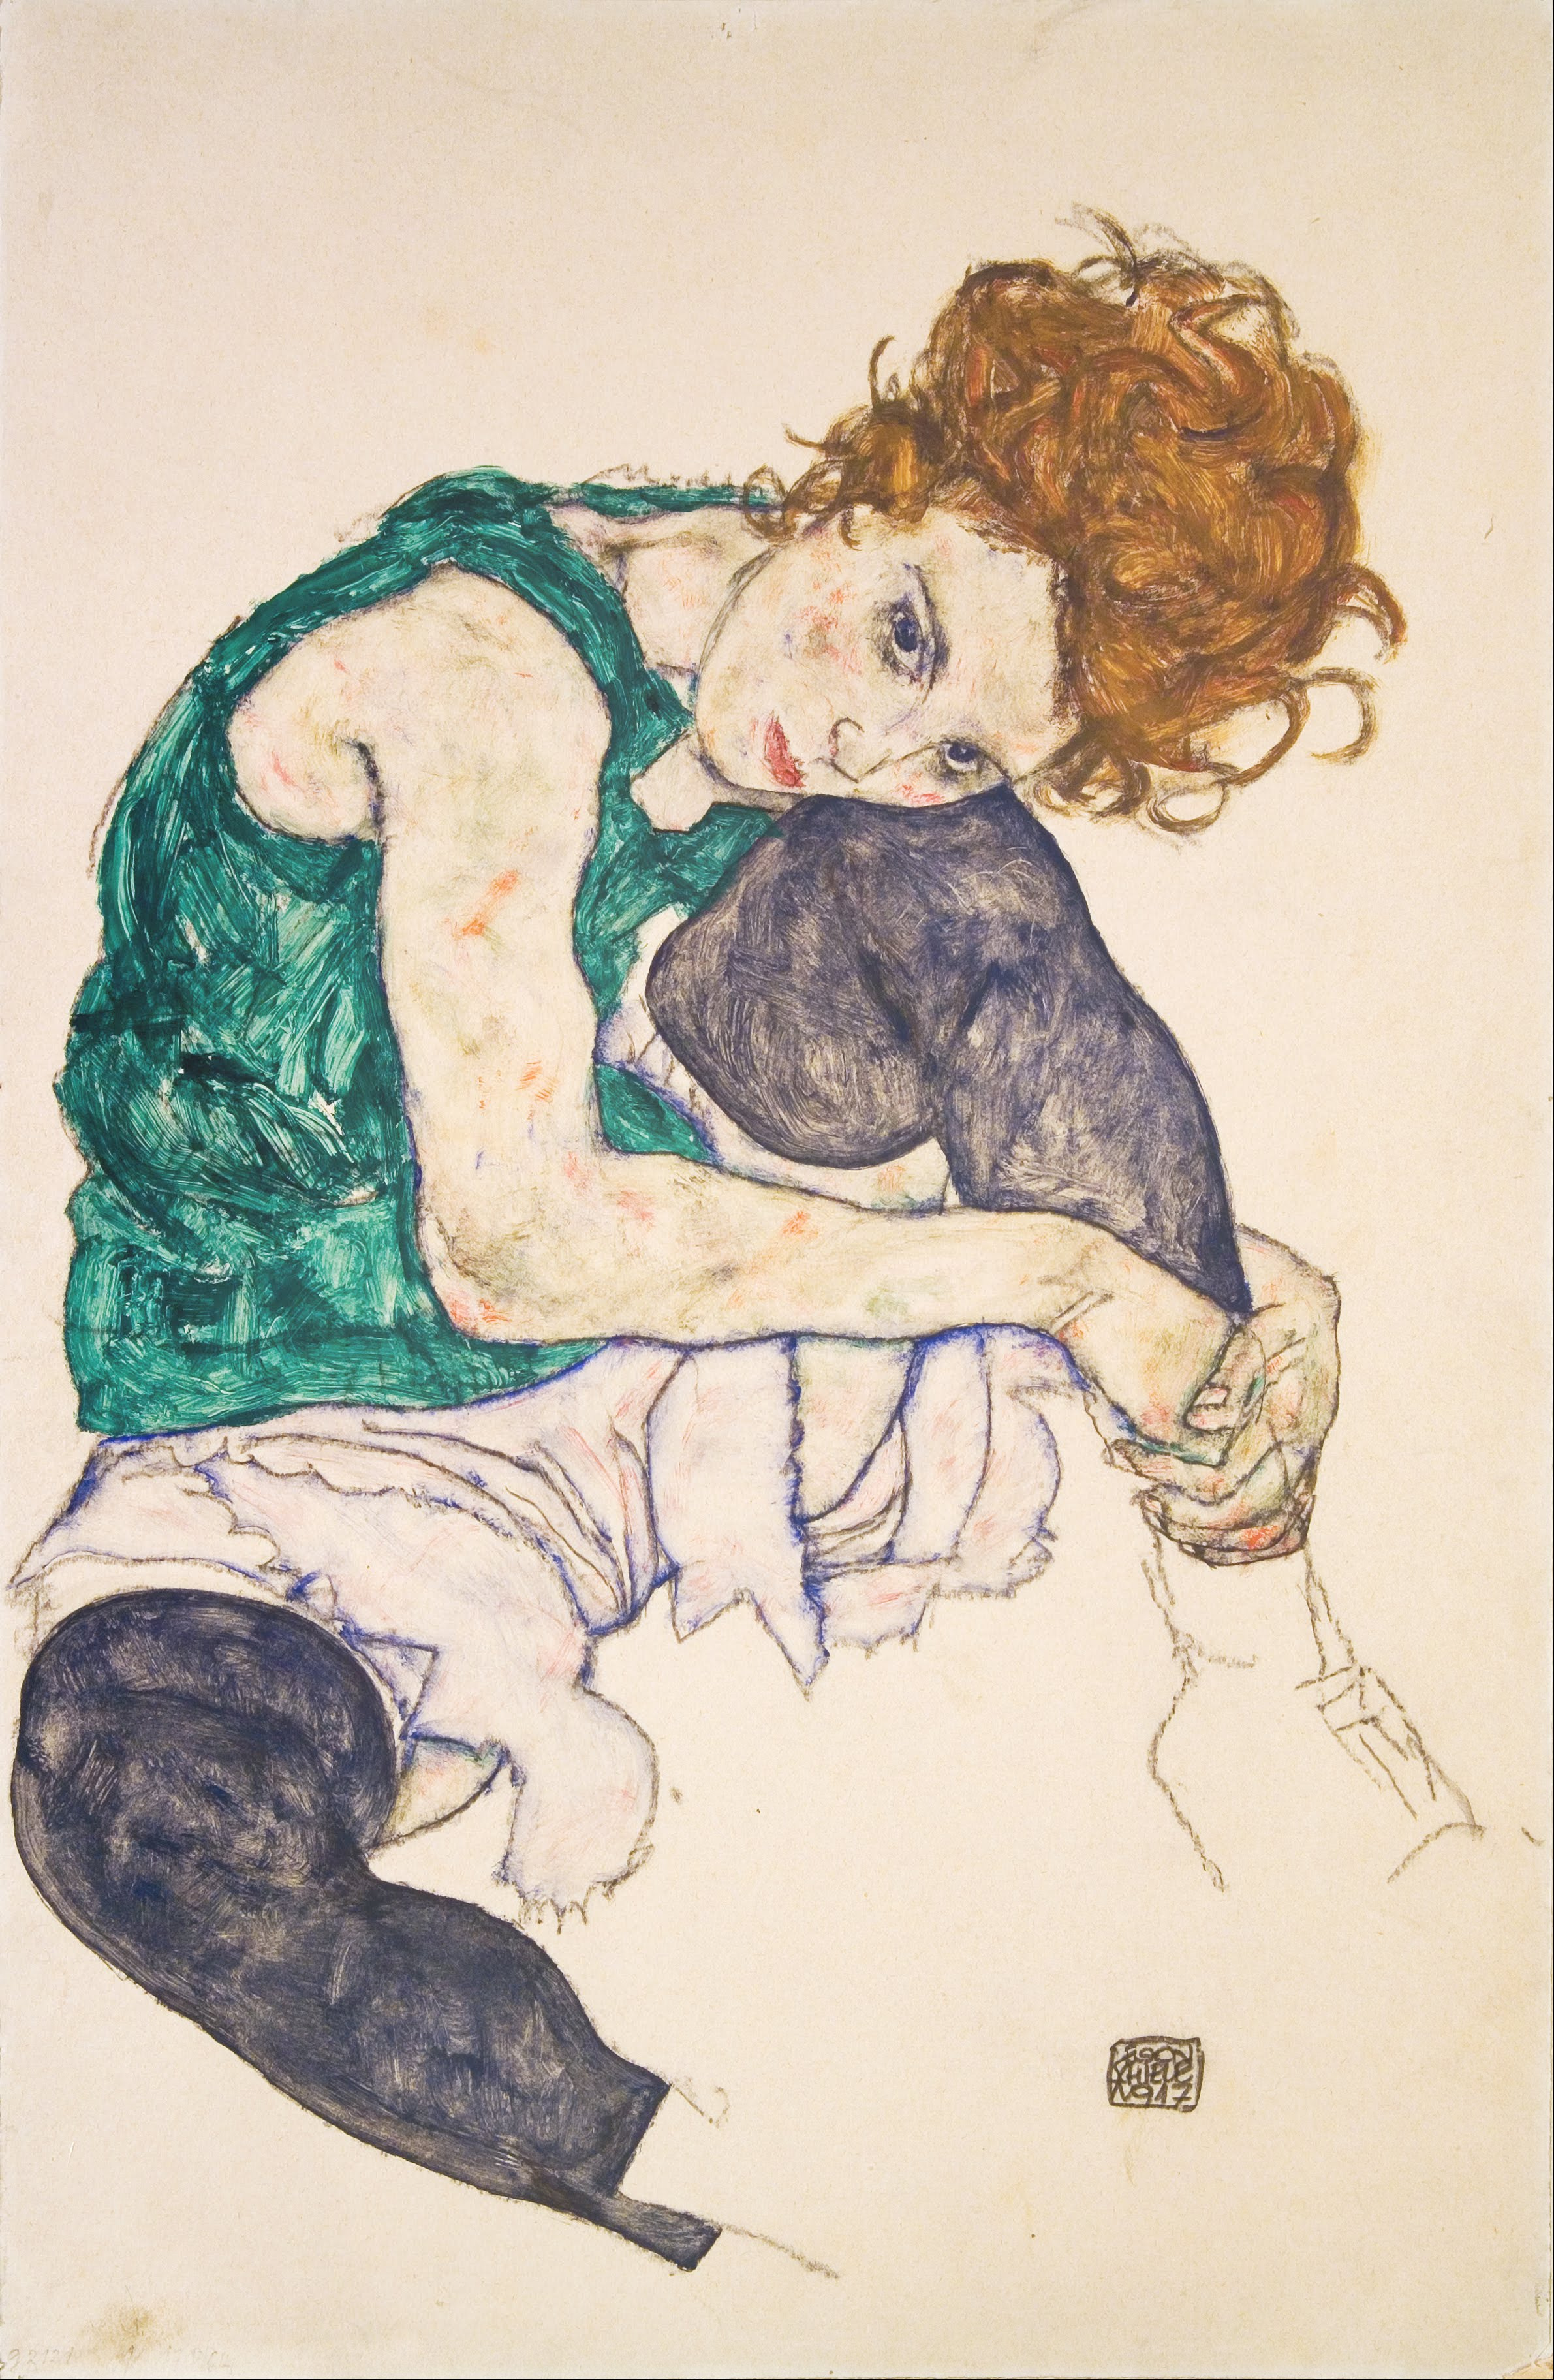 Egon_Schiele_-_Seated_Woman_with_Legs_Drawn_Up_(Adele_Herms)_-_Google_Art_Project.jpg